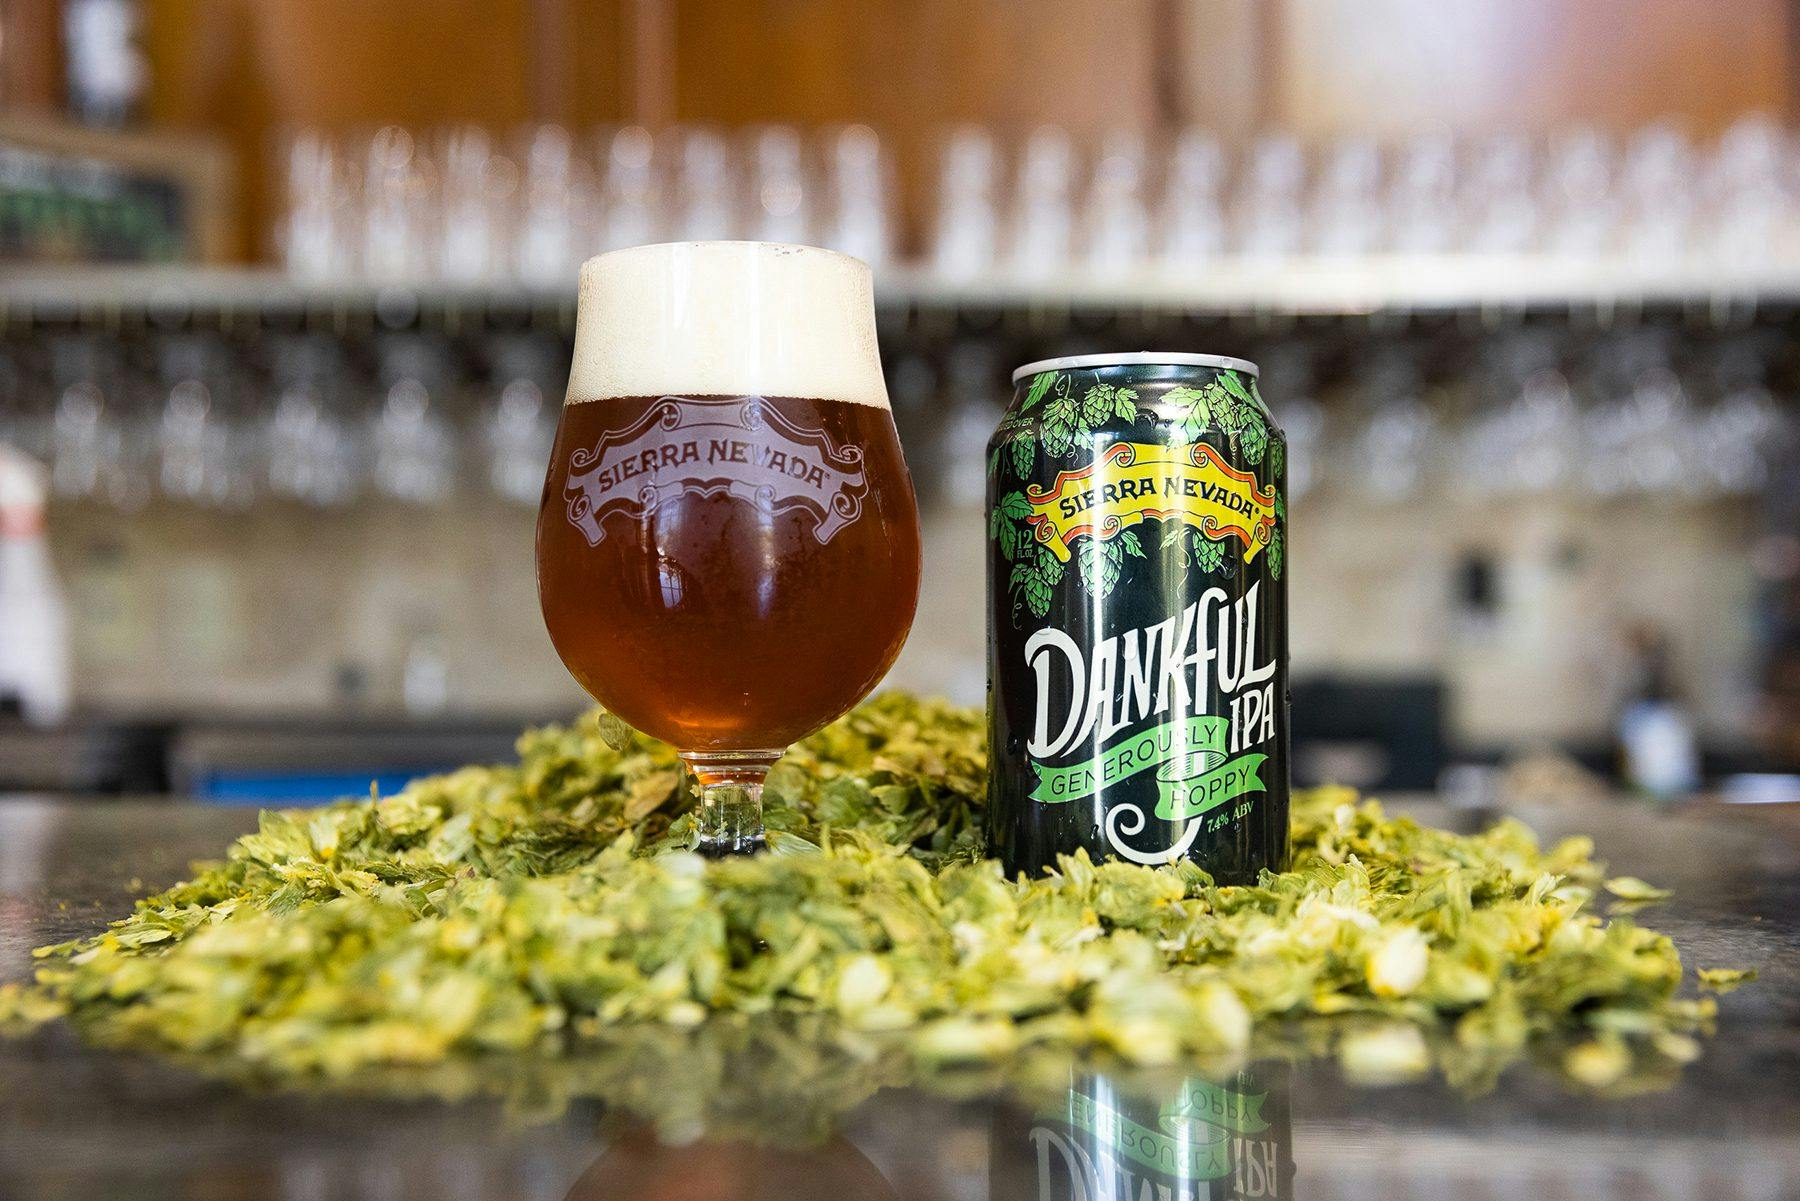 Dankful IPA beer can and pint glass on hops